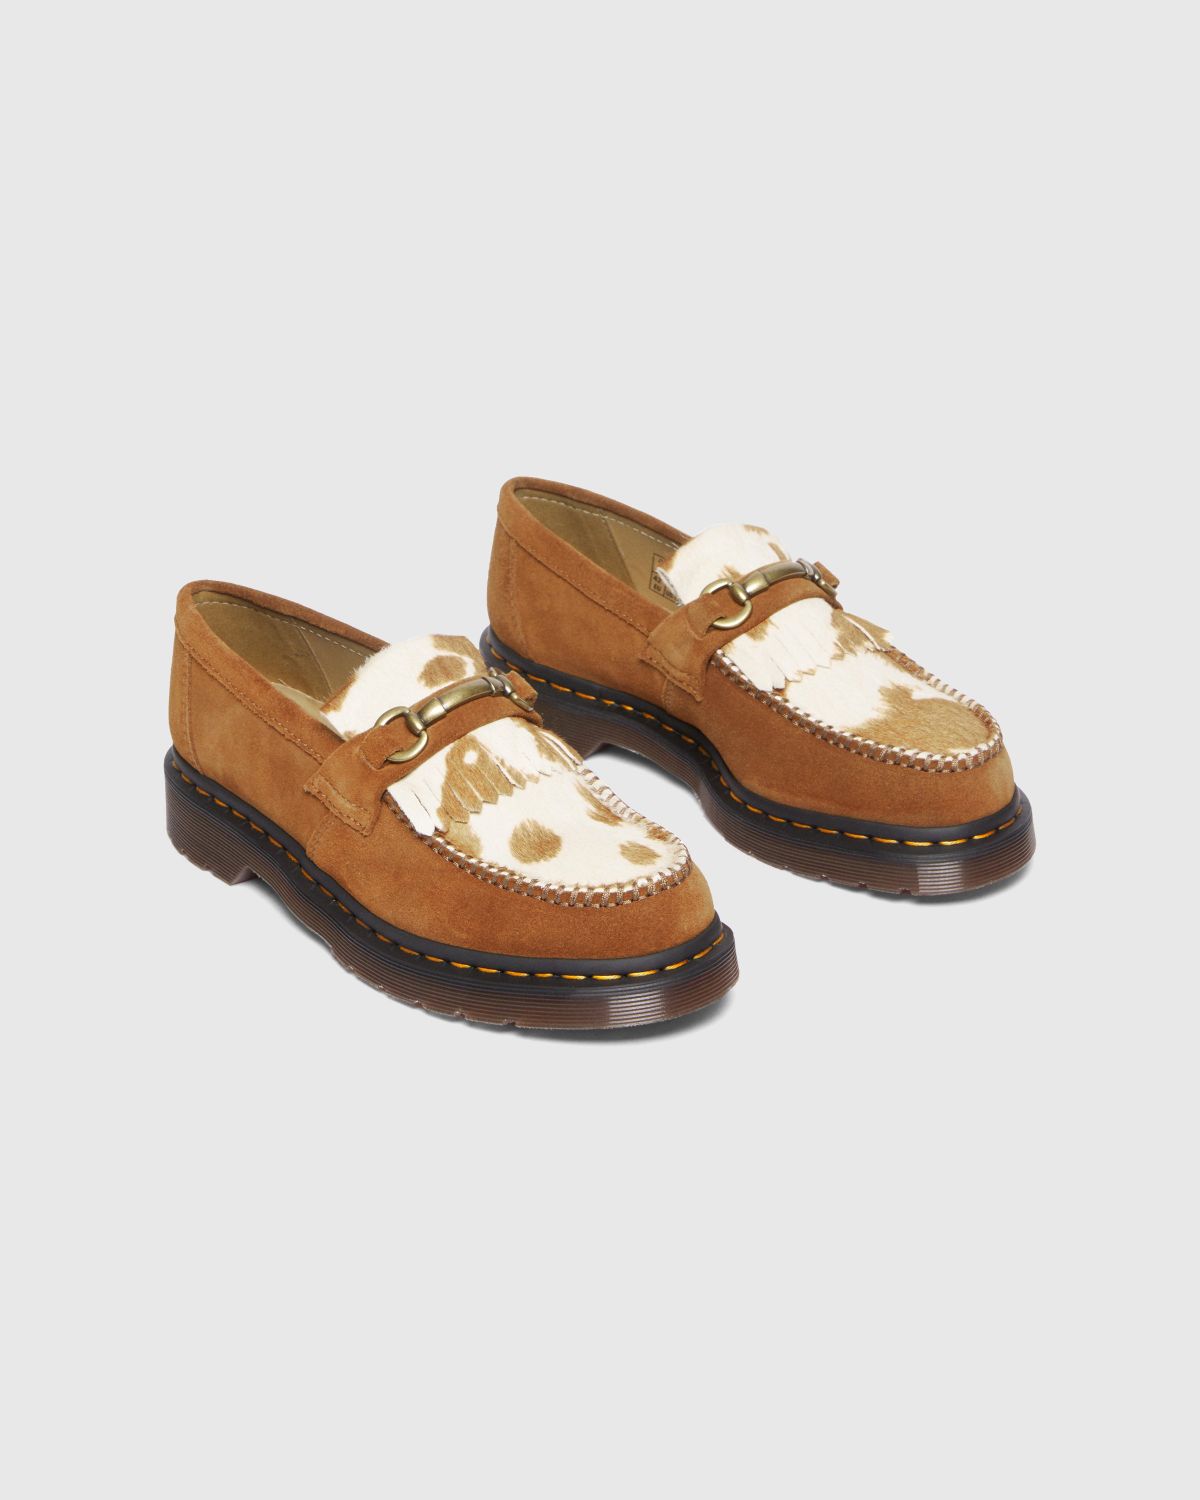 Dr. Martens – Adrian Snaffle Pecan Brown/Jersey Cow Print - Shoes - Brown - Image 2